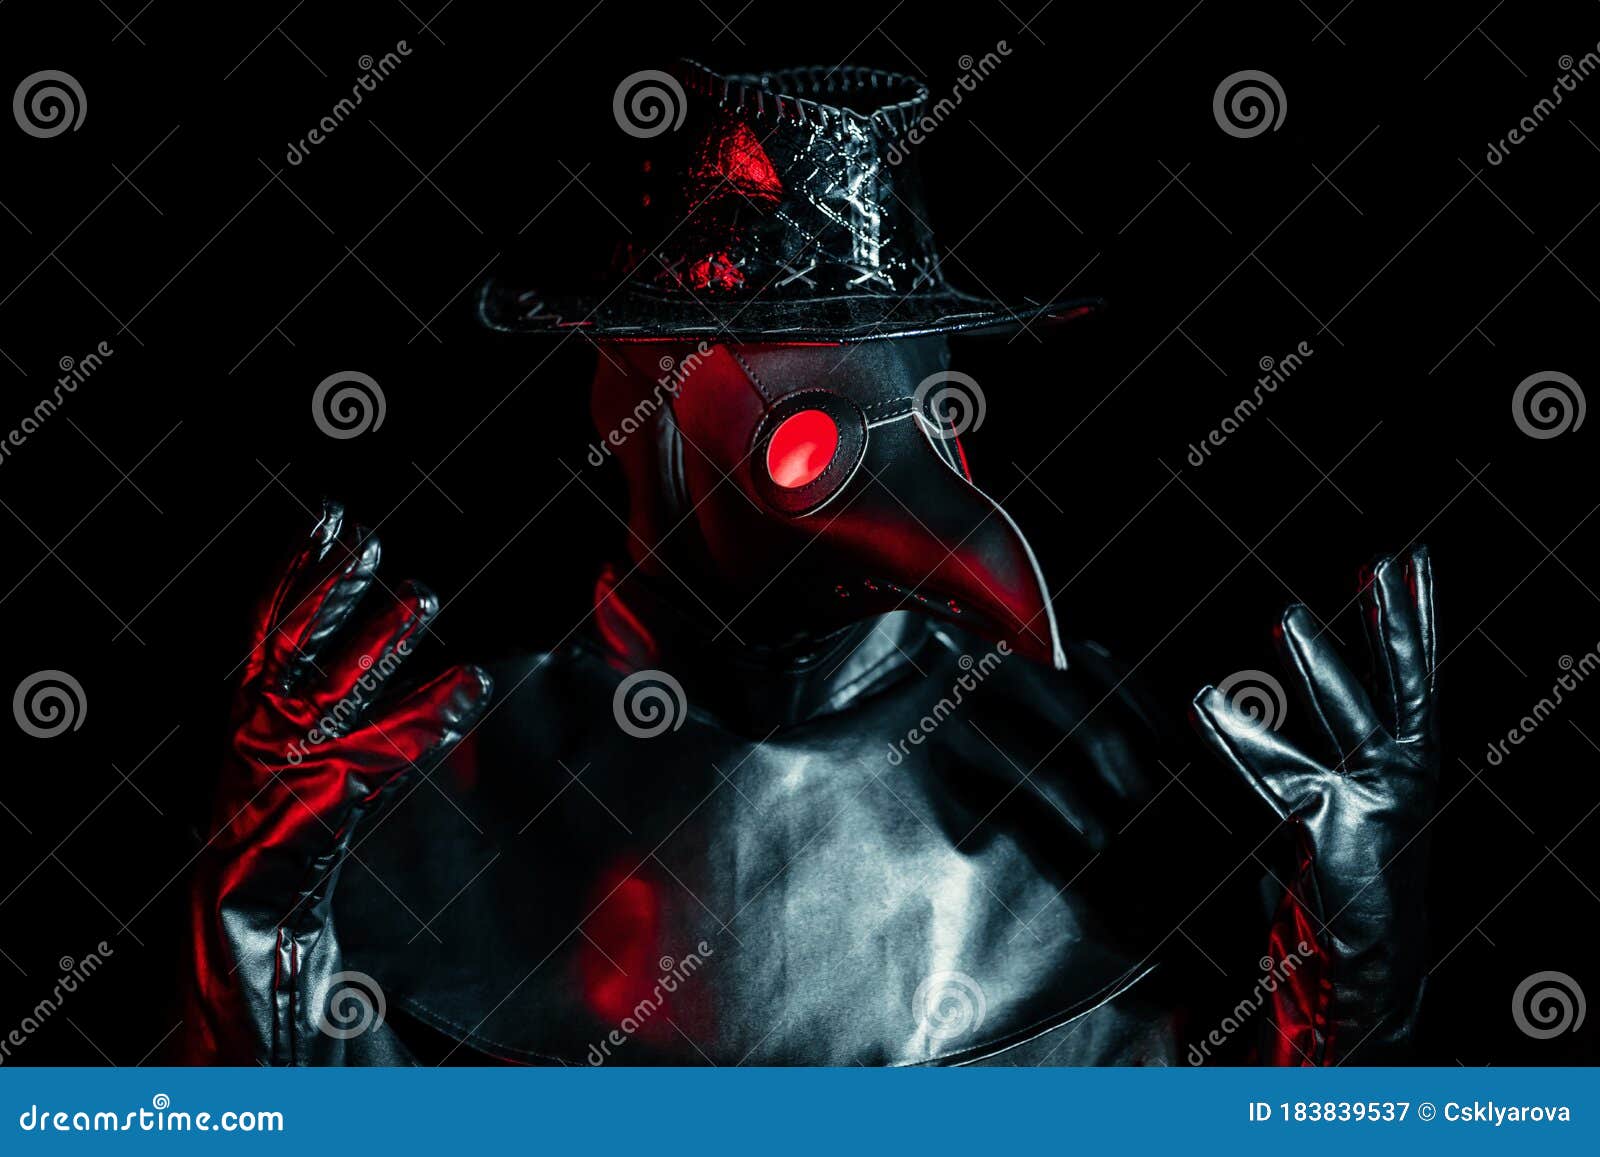 portrait of plague doctor with crow-like mask  on black background. creepy mask, halloween, historical terrible